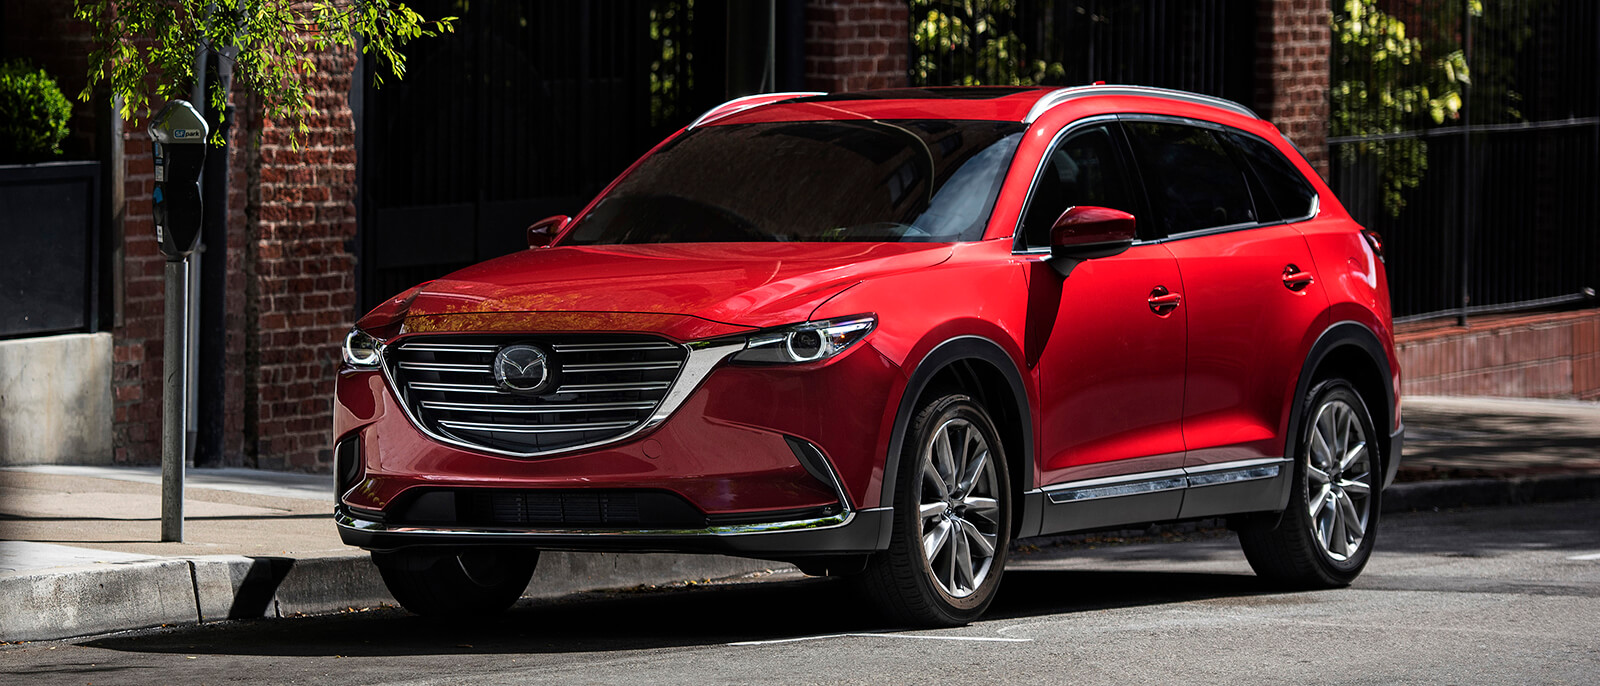 2016 Mazda CX-9 Model Info | Price, MPG, Features, Photos & More